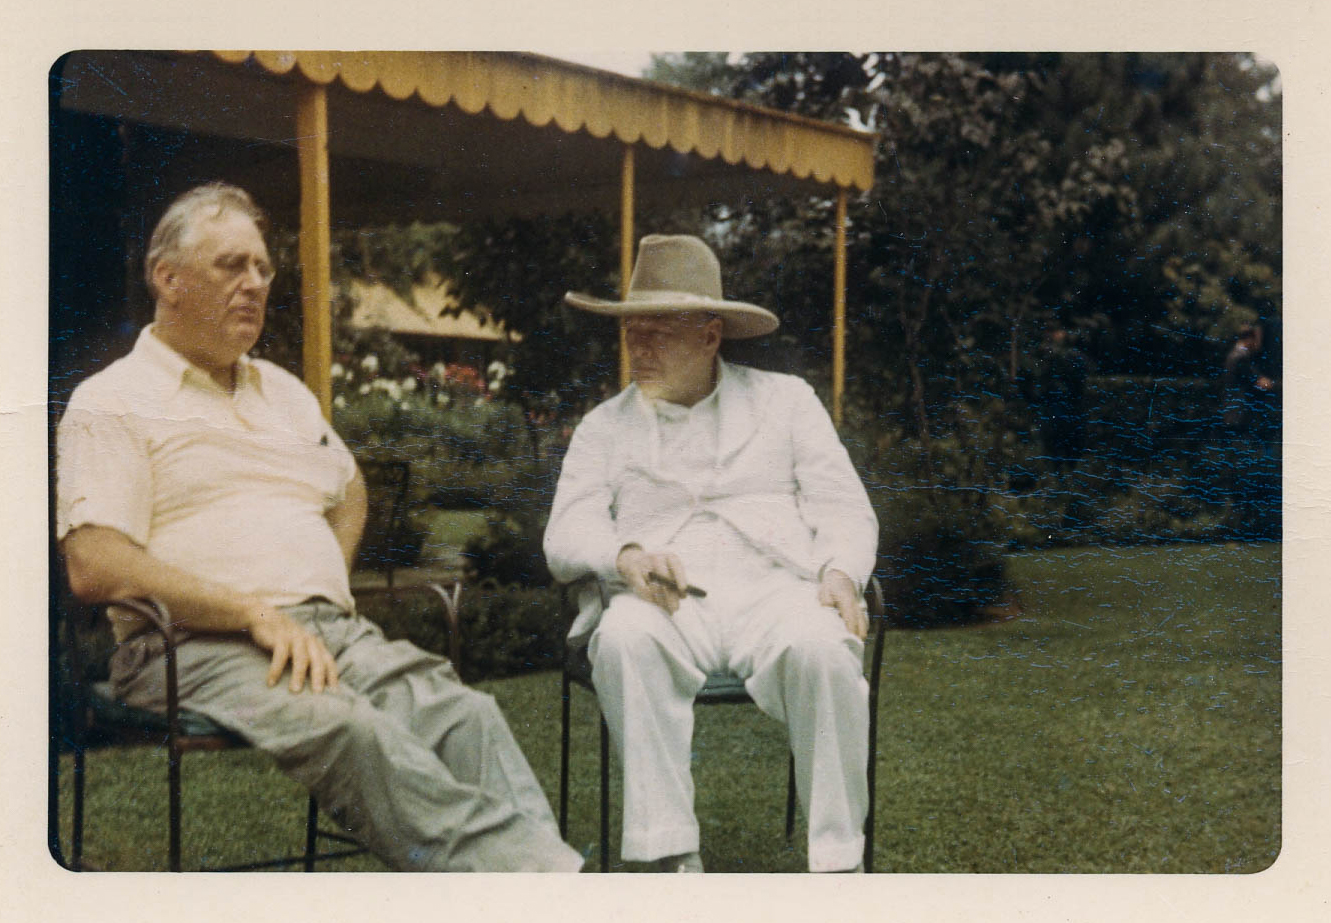 FDR and Winston Churchill seated on the lawn at Val-Kill.